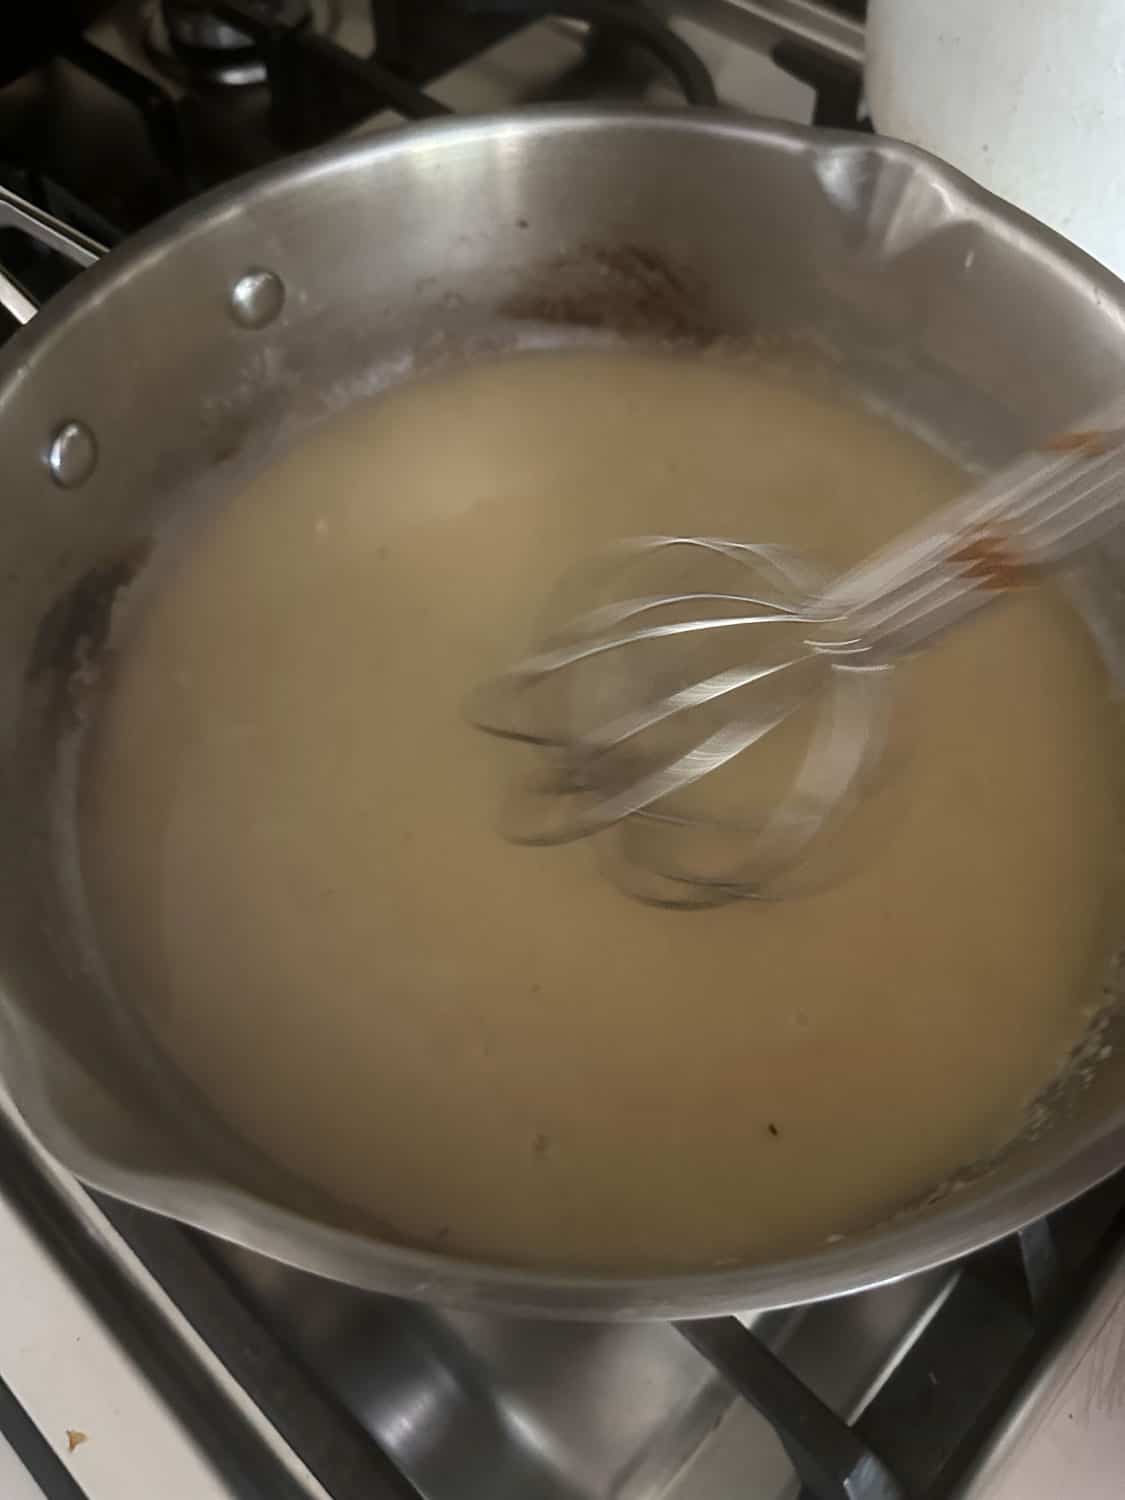 whisking in the broth and cream